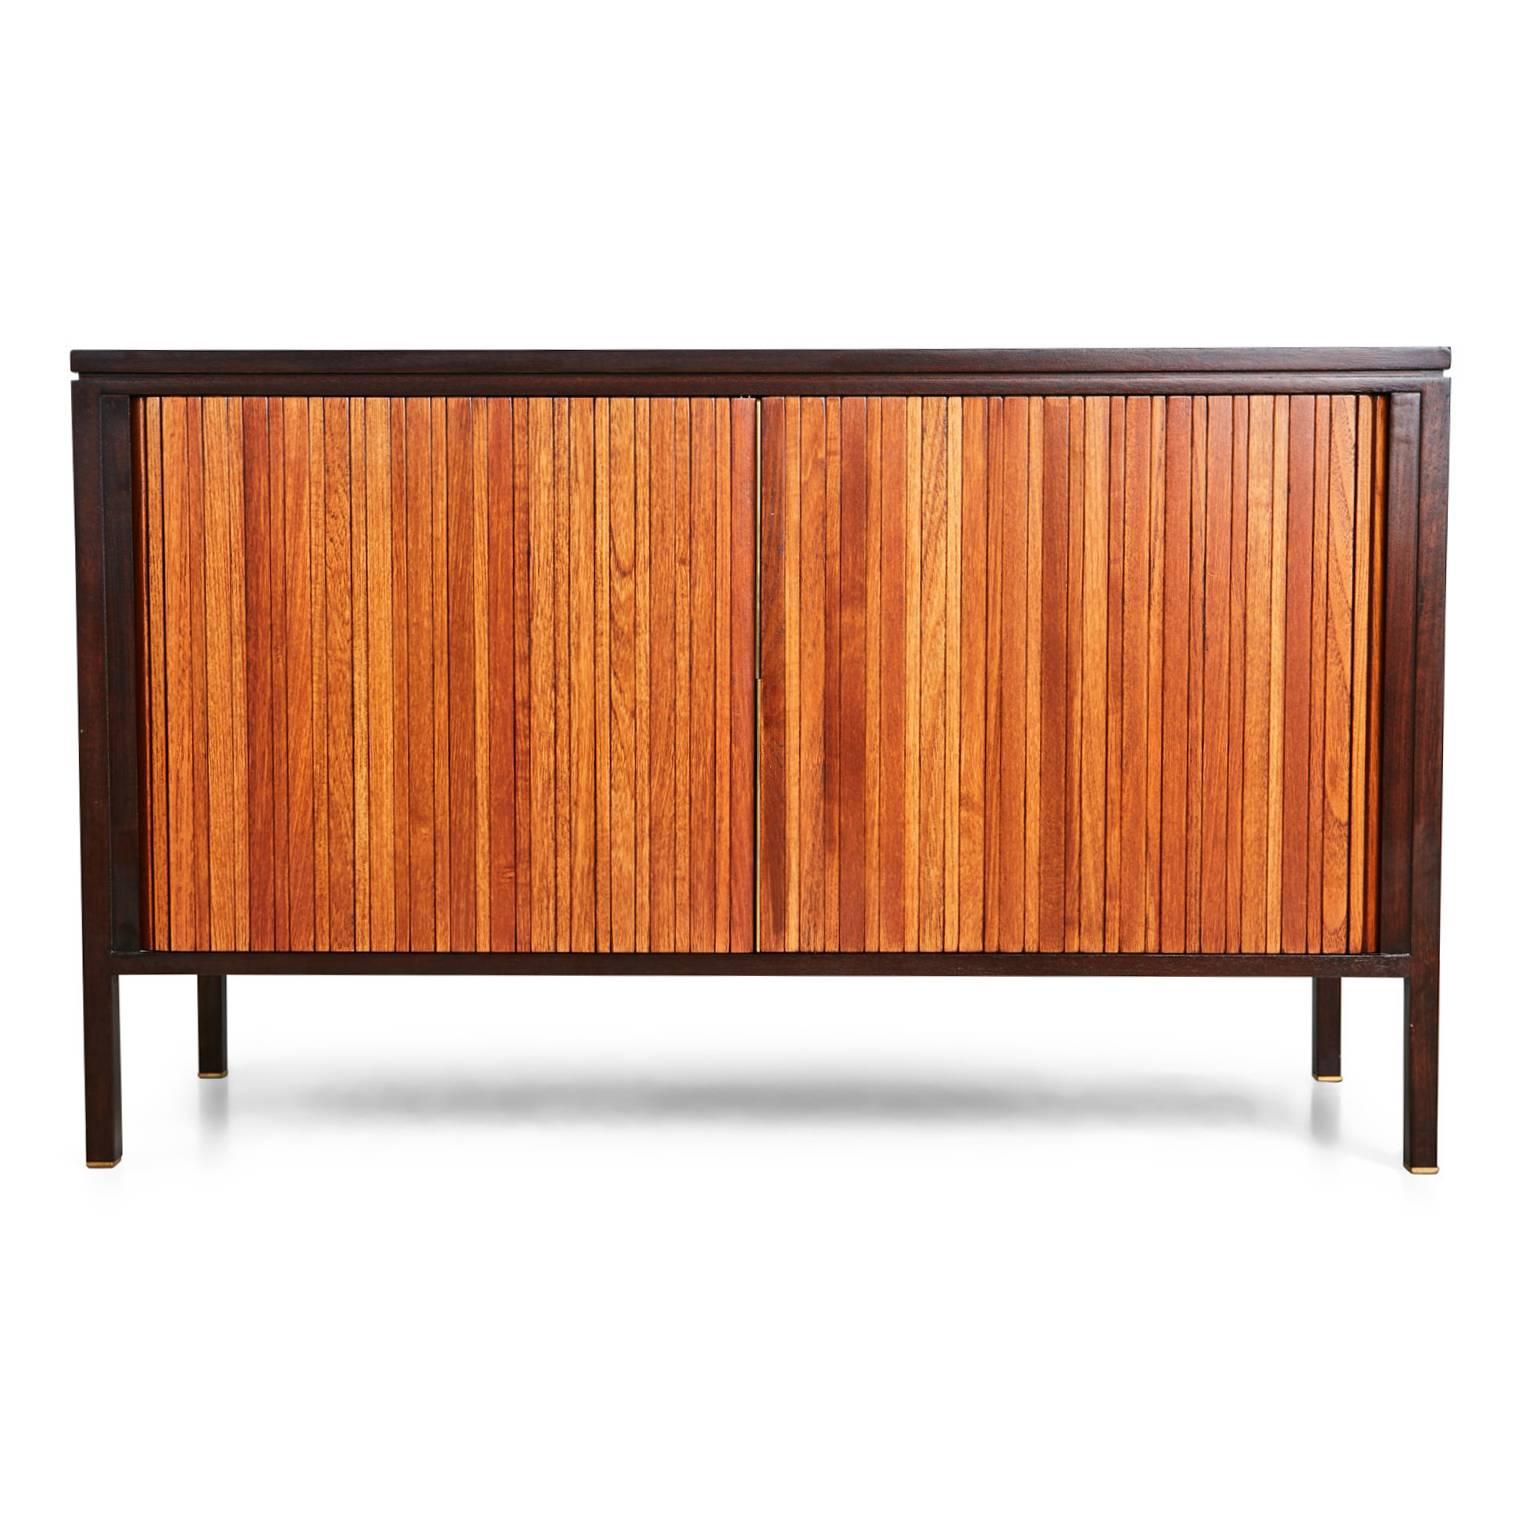 Designed by Edward Wormley for Dunbar, this innovative, inspired piece functions as both a credenza and a pop-up table, enabling it to operate in numerous settings. Comprising of teak tambour doors with brass lip hardware, which slide and retract